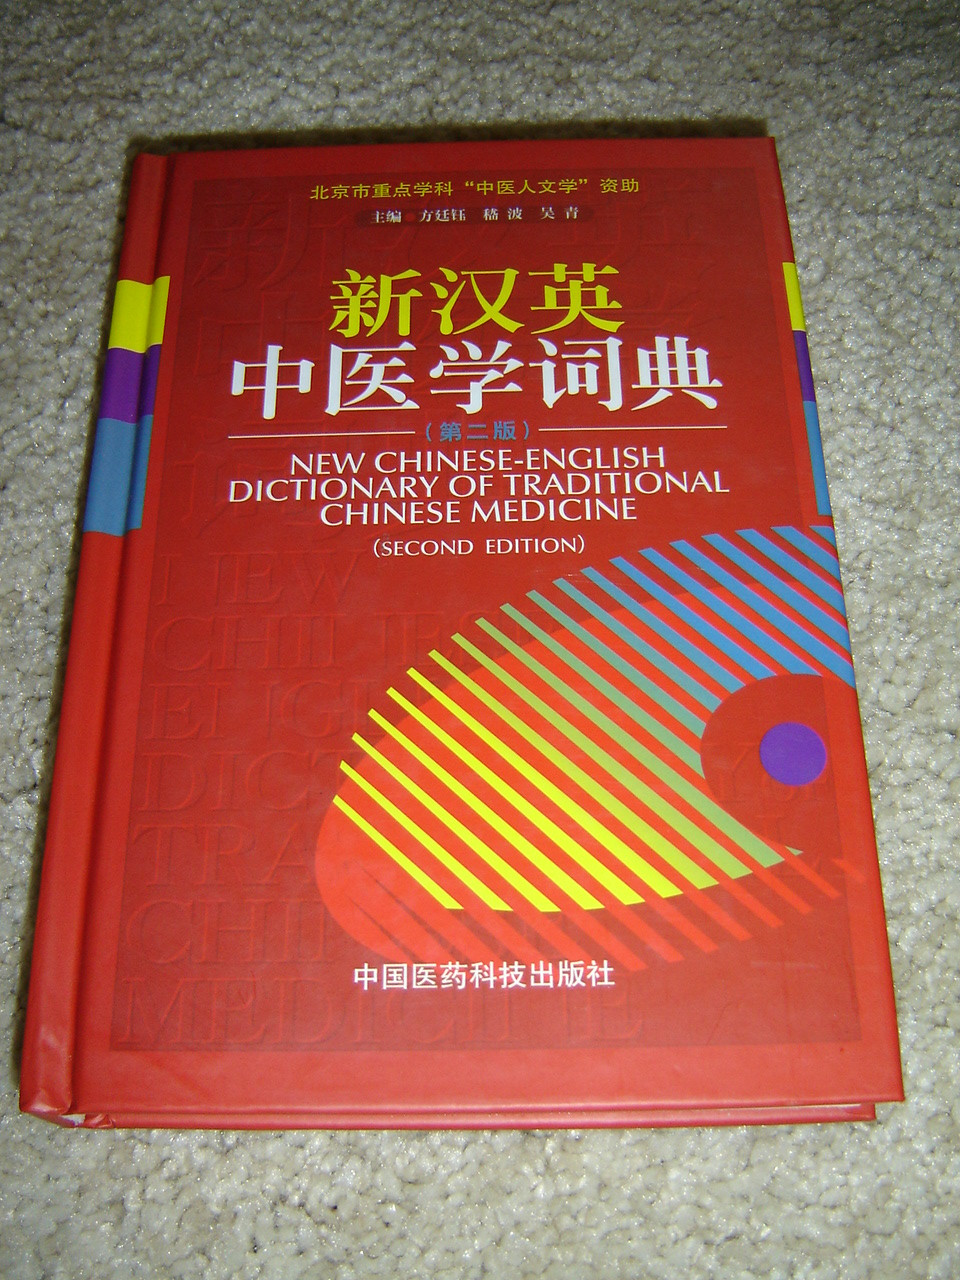 New Chinese English Dictionary of Traditional Chinese Medicine Second